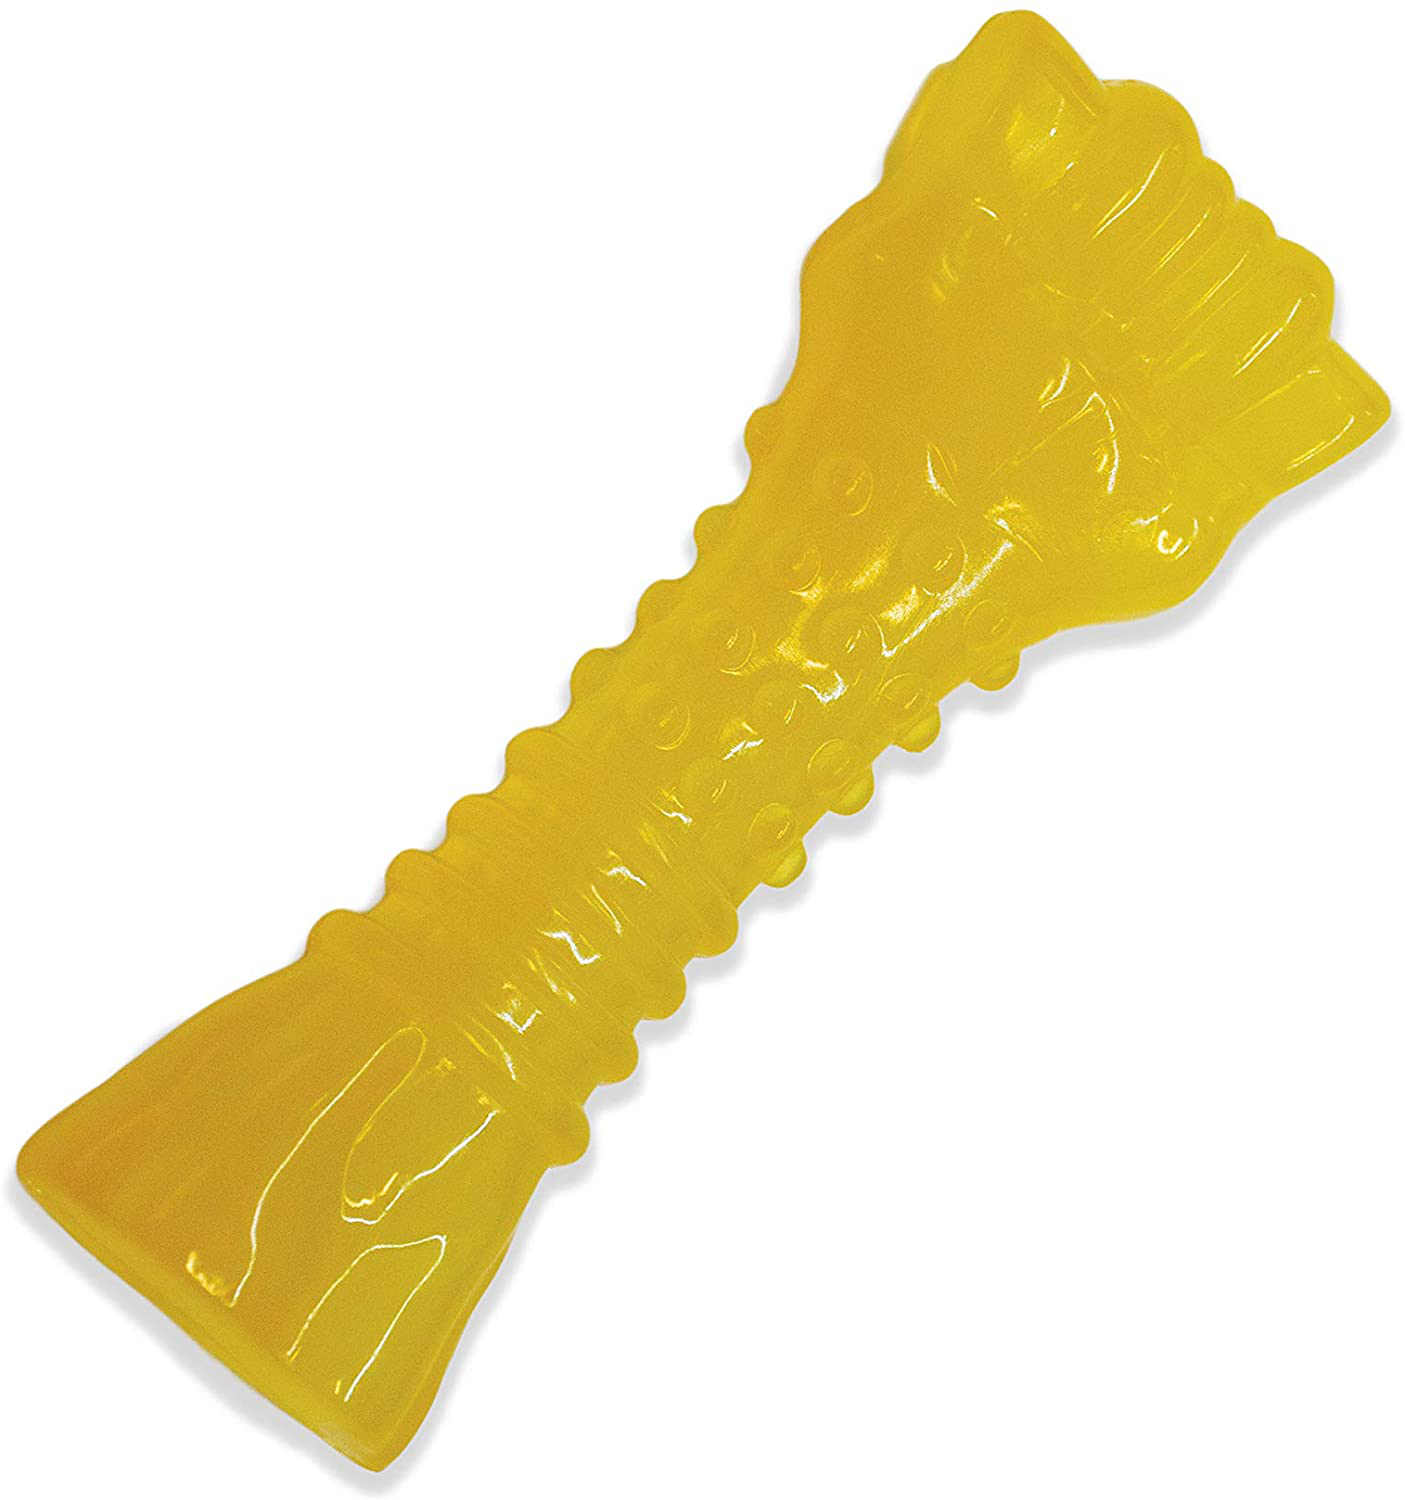 Nylabone Chill and Chew Dog Chew Toy for Teething Puppies and Small/Medium/Large Dogs Animals & Pet Supplies > Pet Supplies > Dog Supplies > Dog Toys Central Garden & Pet   